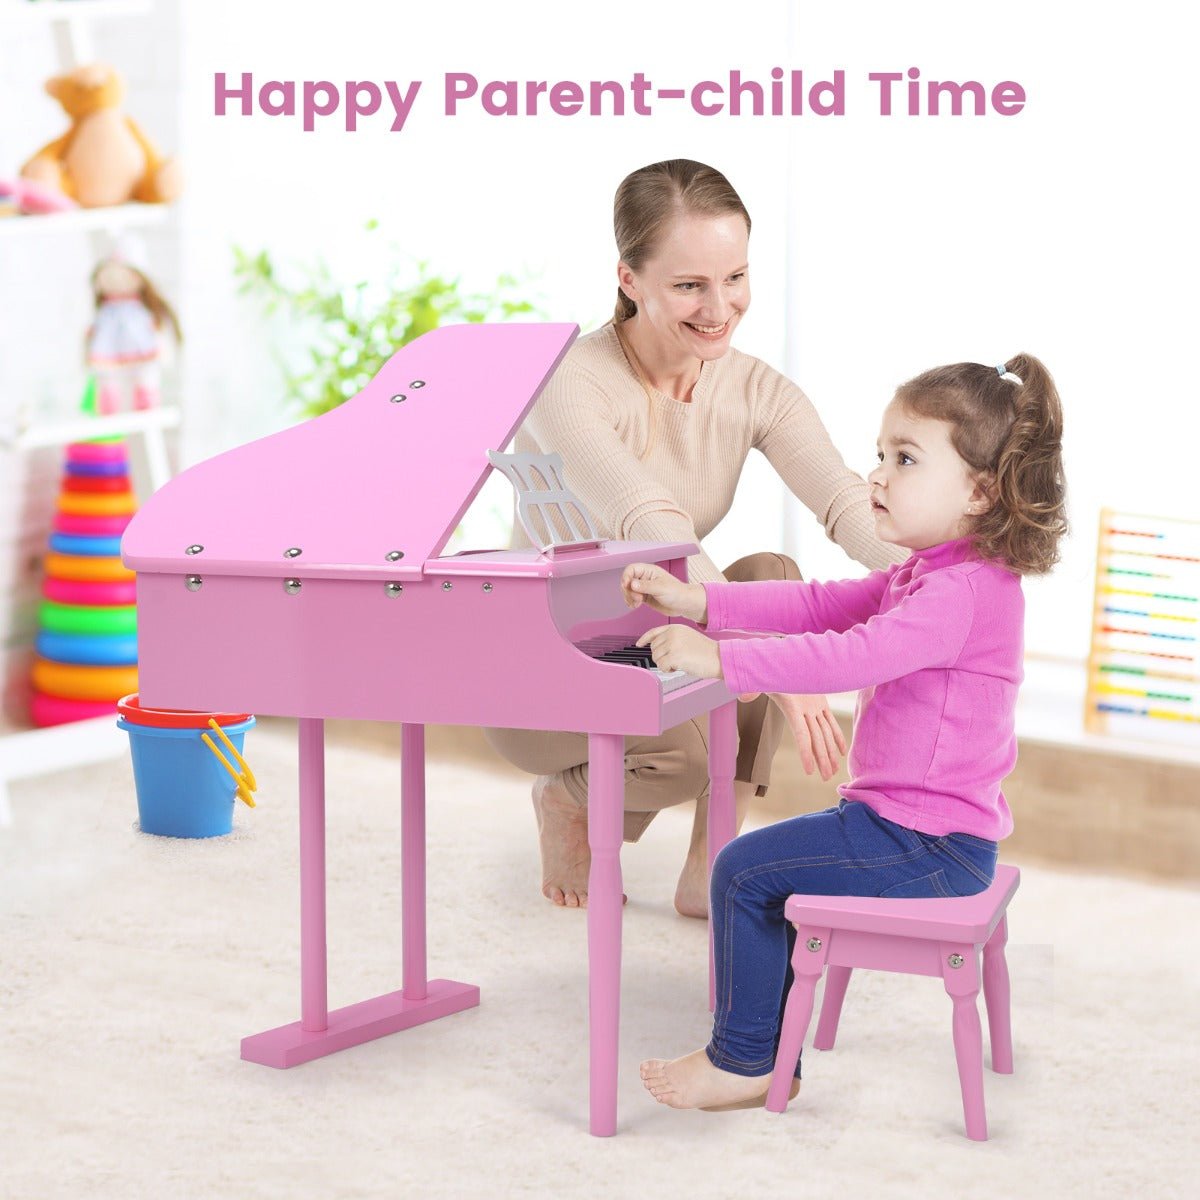 Kids Piano Keyboard - Purchase Today for Musical Fun